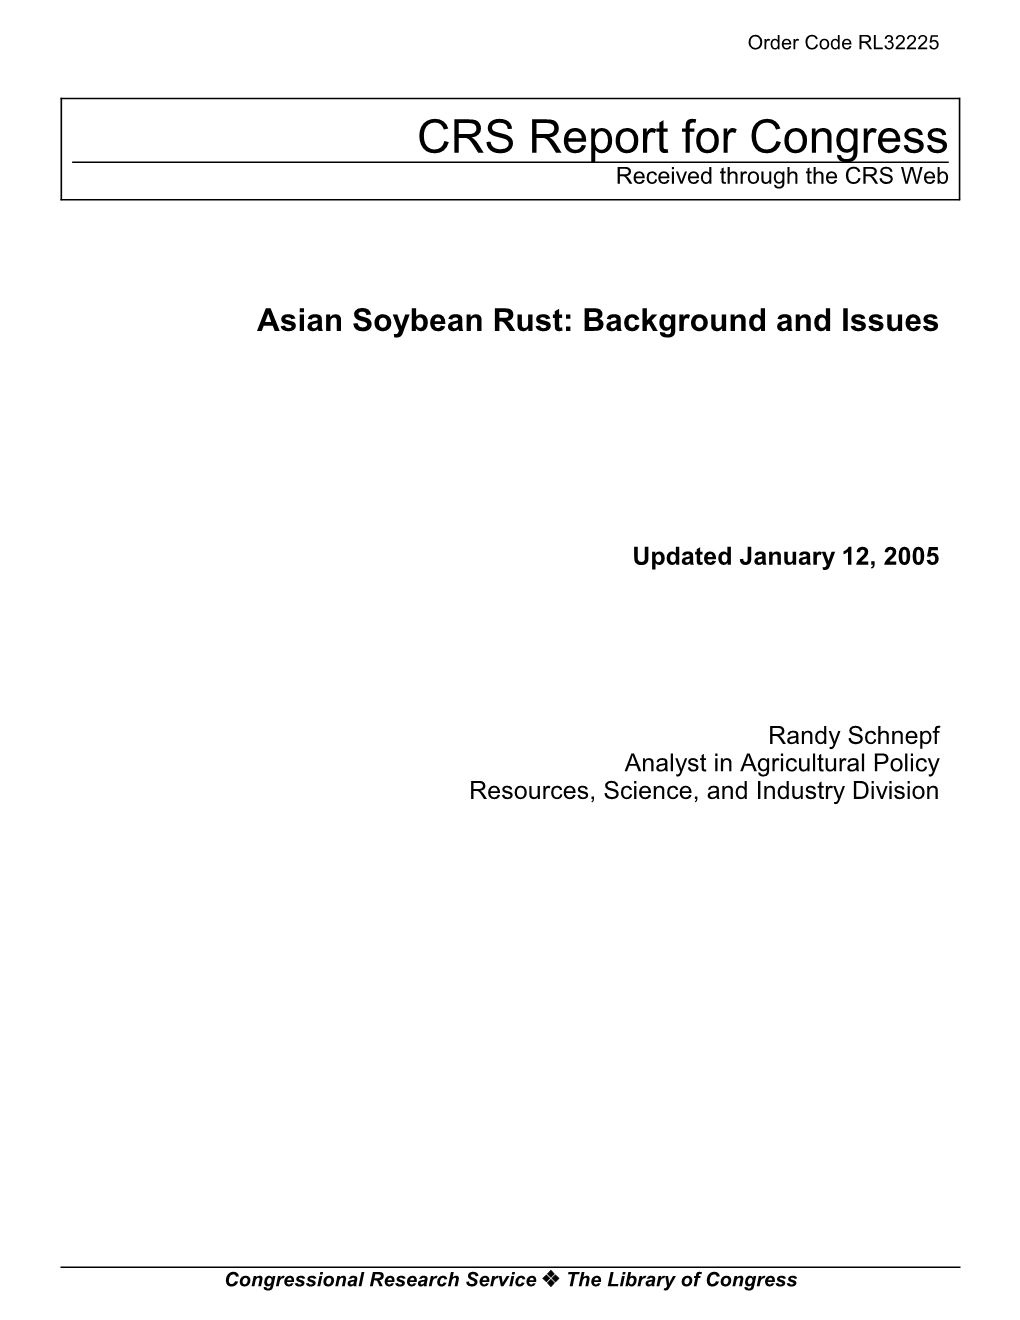 Asian Soybean Rust: Background and Issues